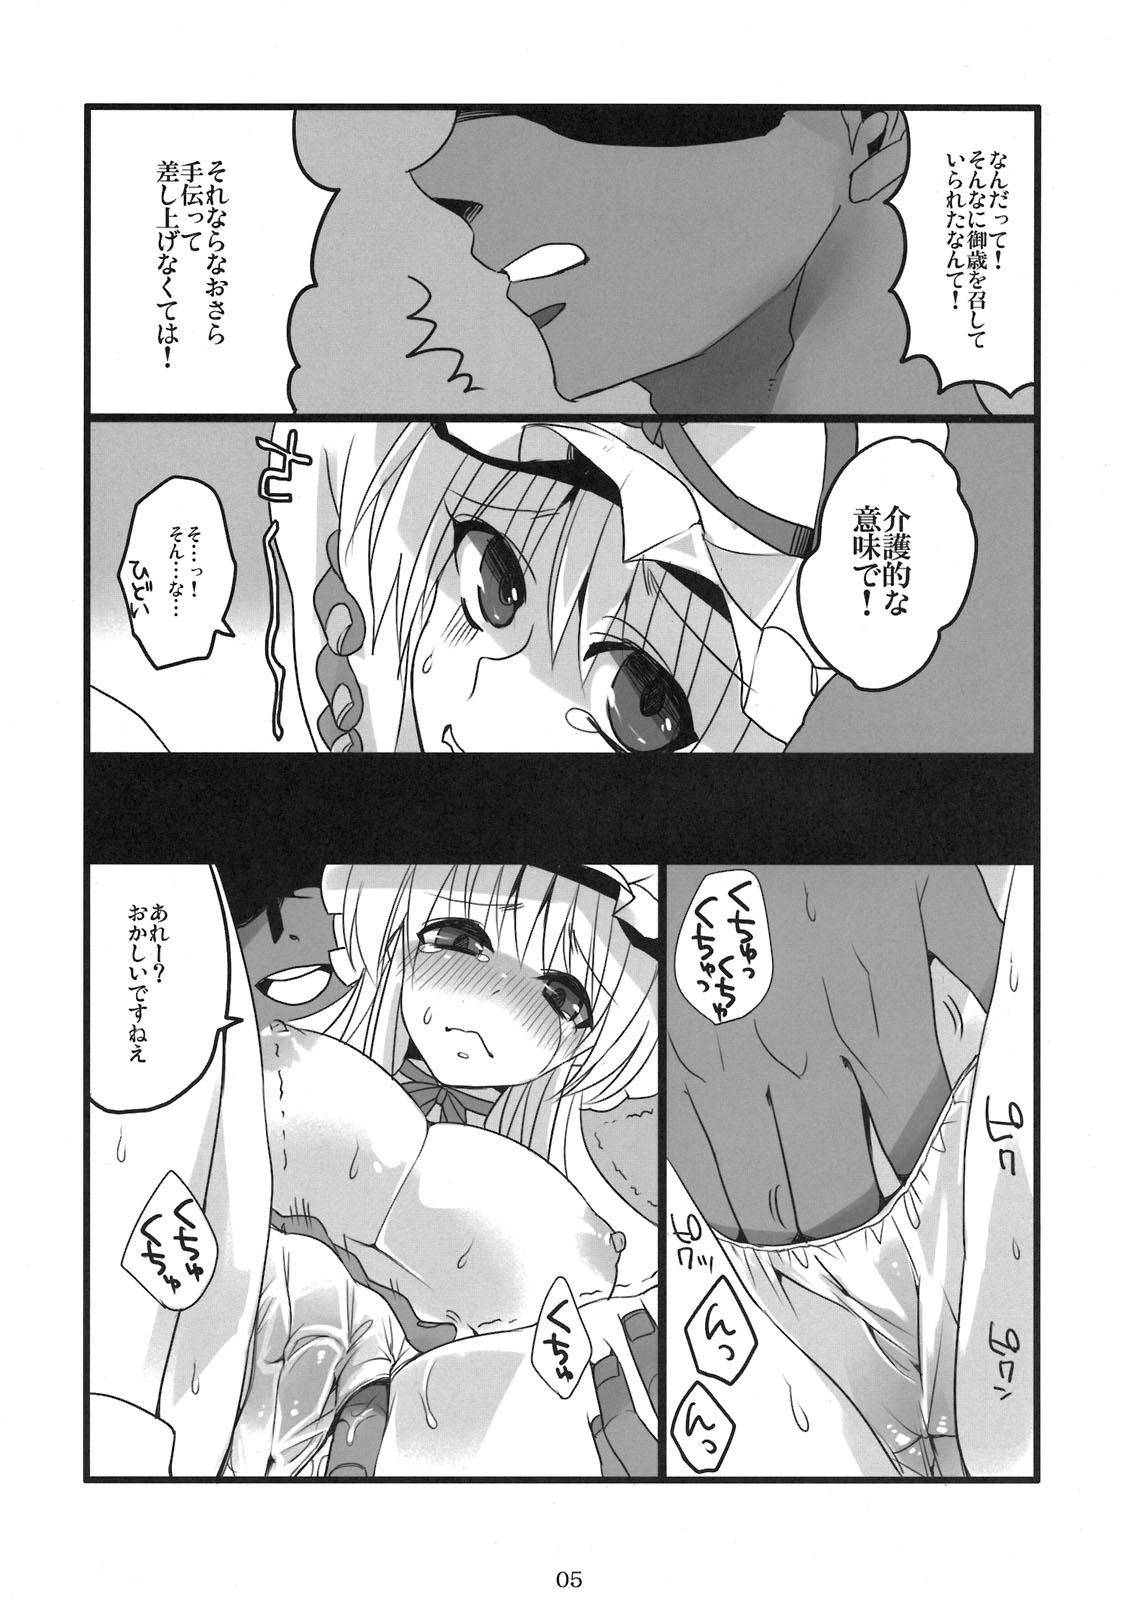 Sapphicerotica Gensoukyou Toshimaen - Touhou project Mofos - Page 5